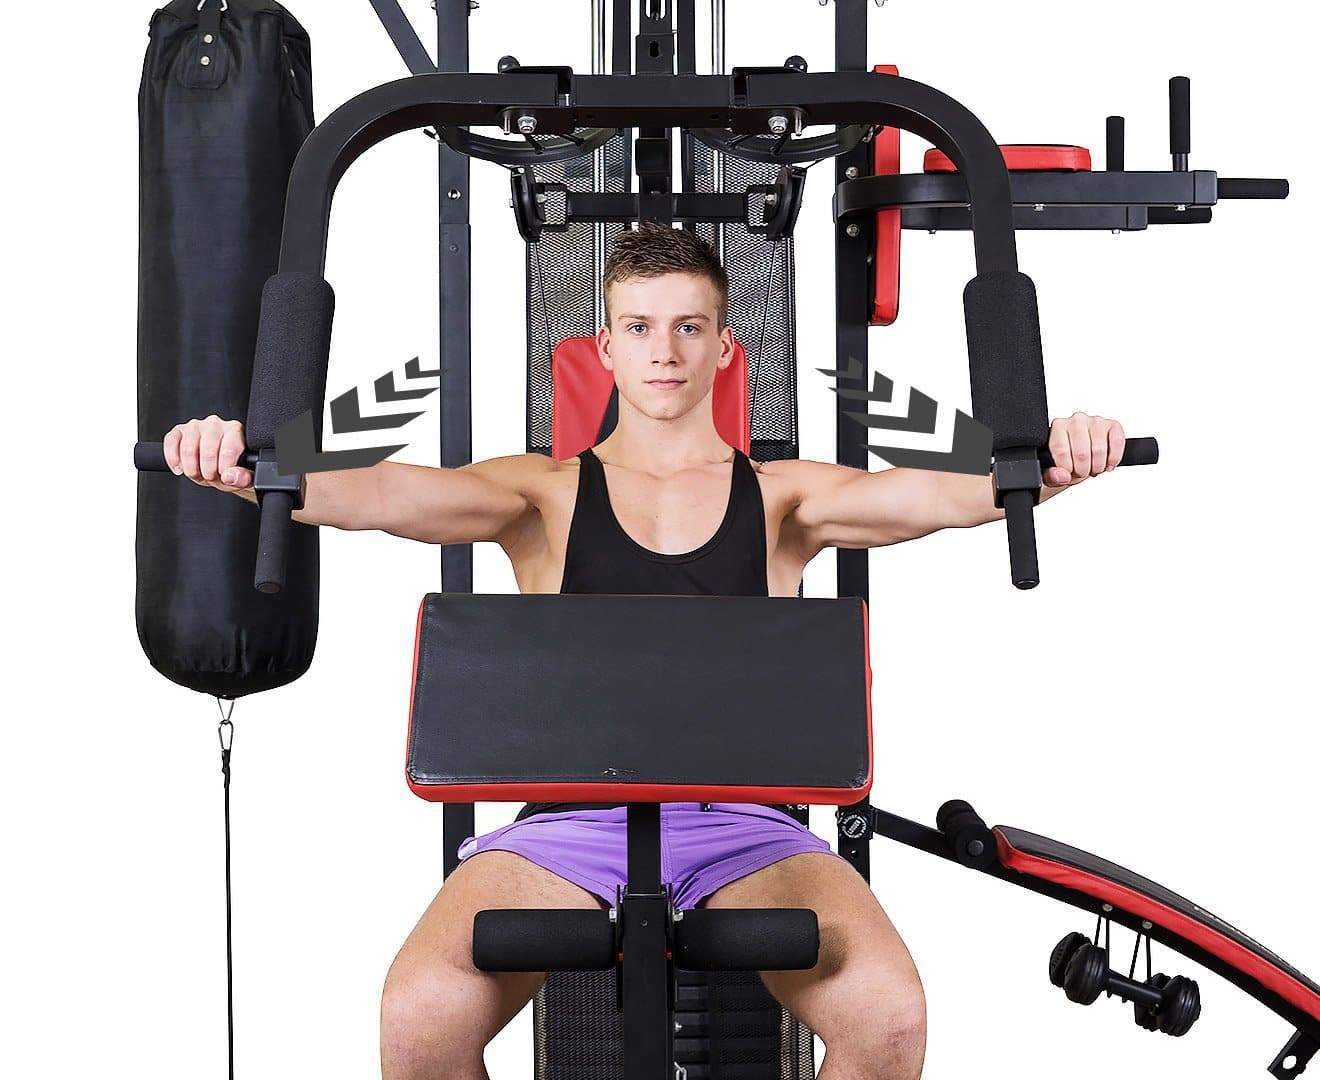 Fatherday-sports and fitness Powertrain Multi-Station Home Gym with Punching Bag - 165lbs